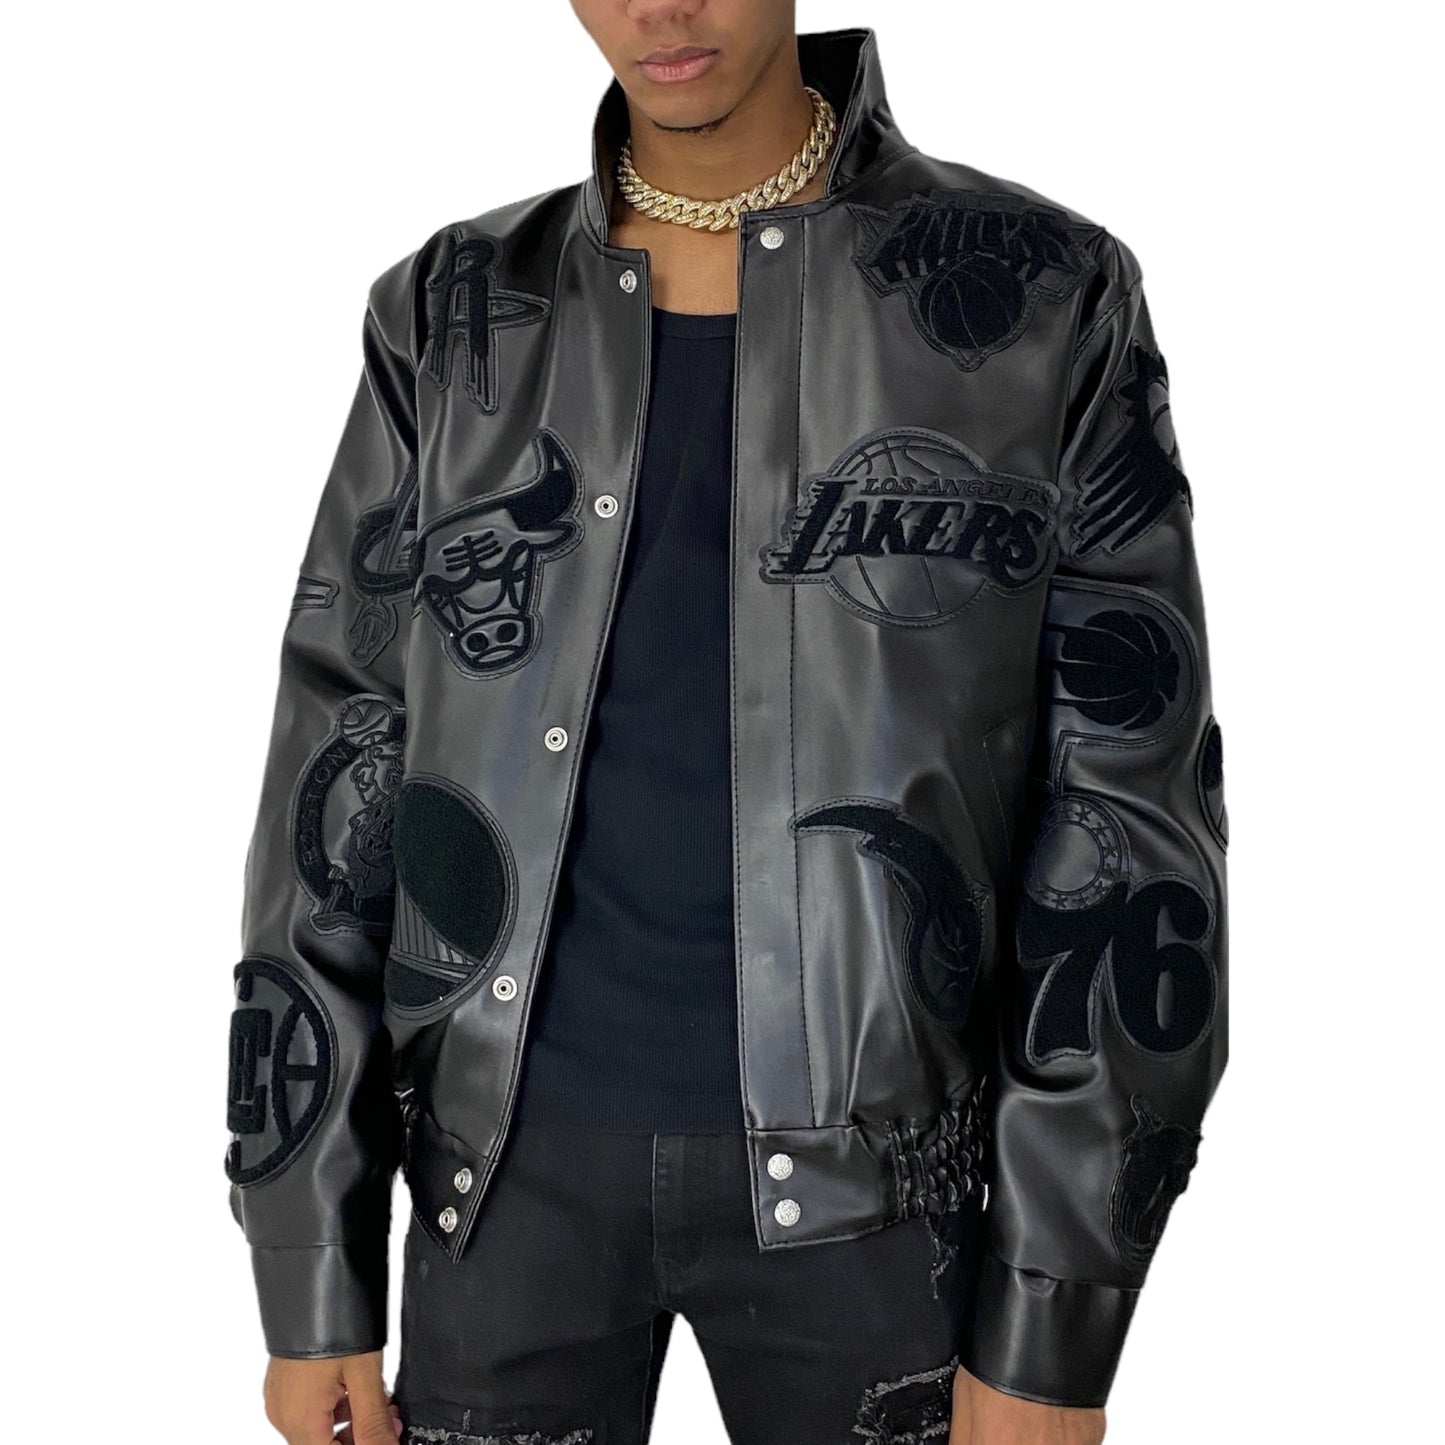 NBA Collage Patch Jacket